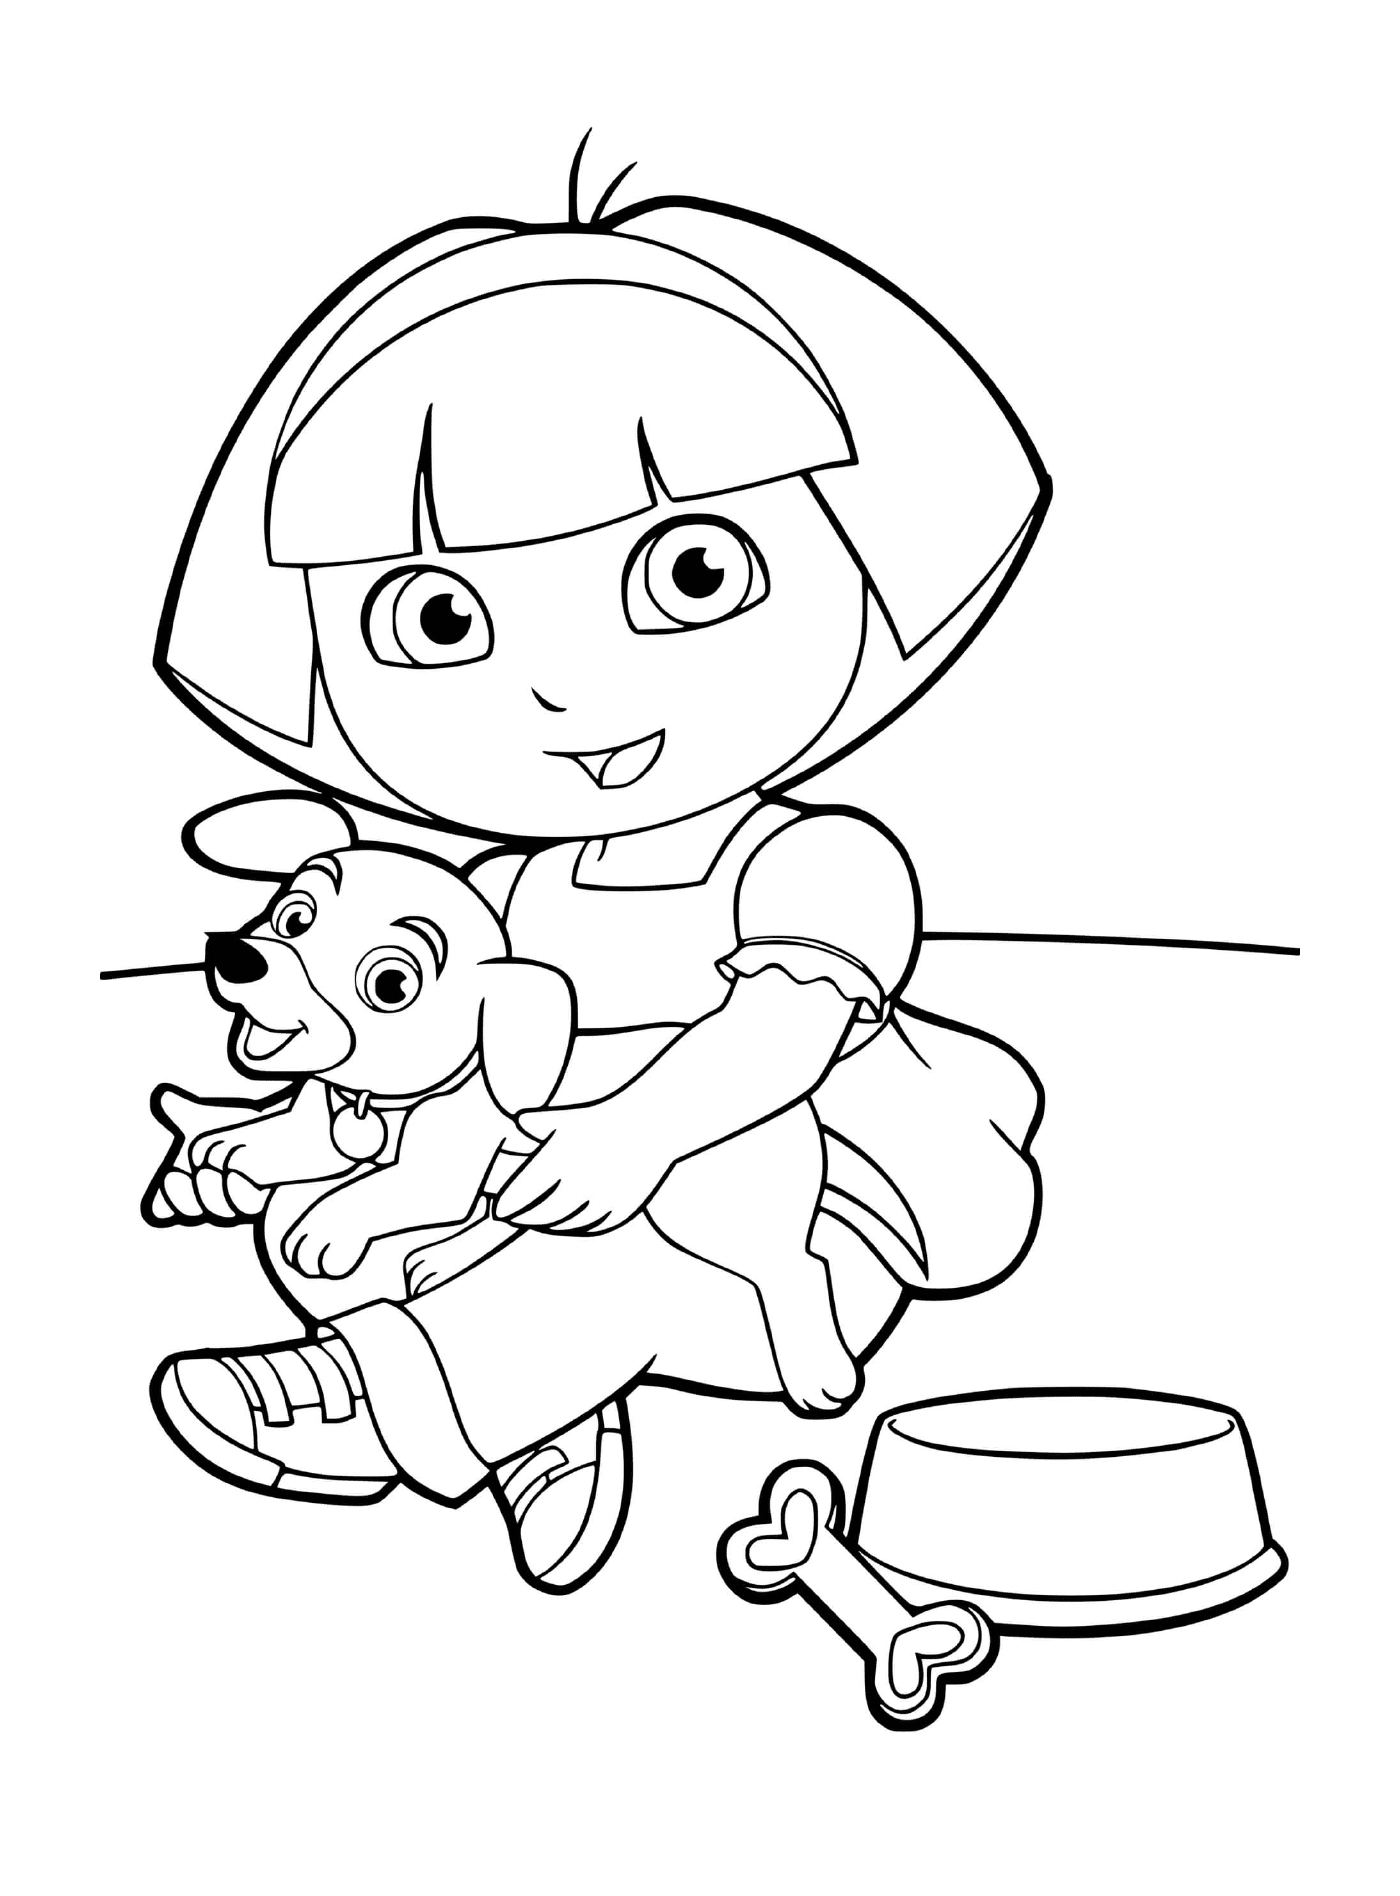  Dora takes care of her adorable dog 